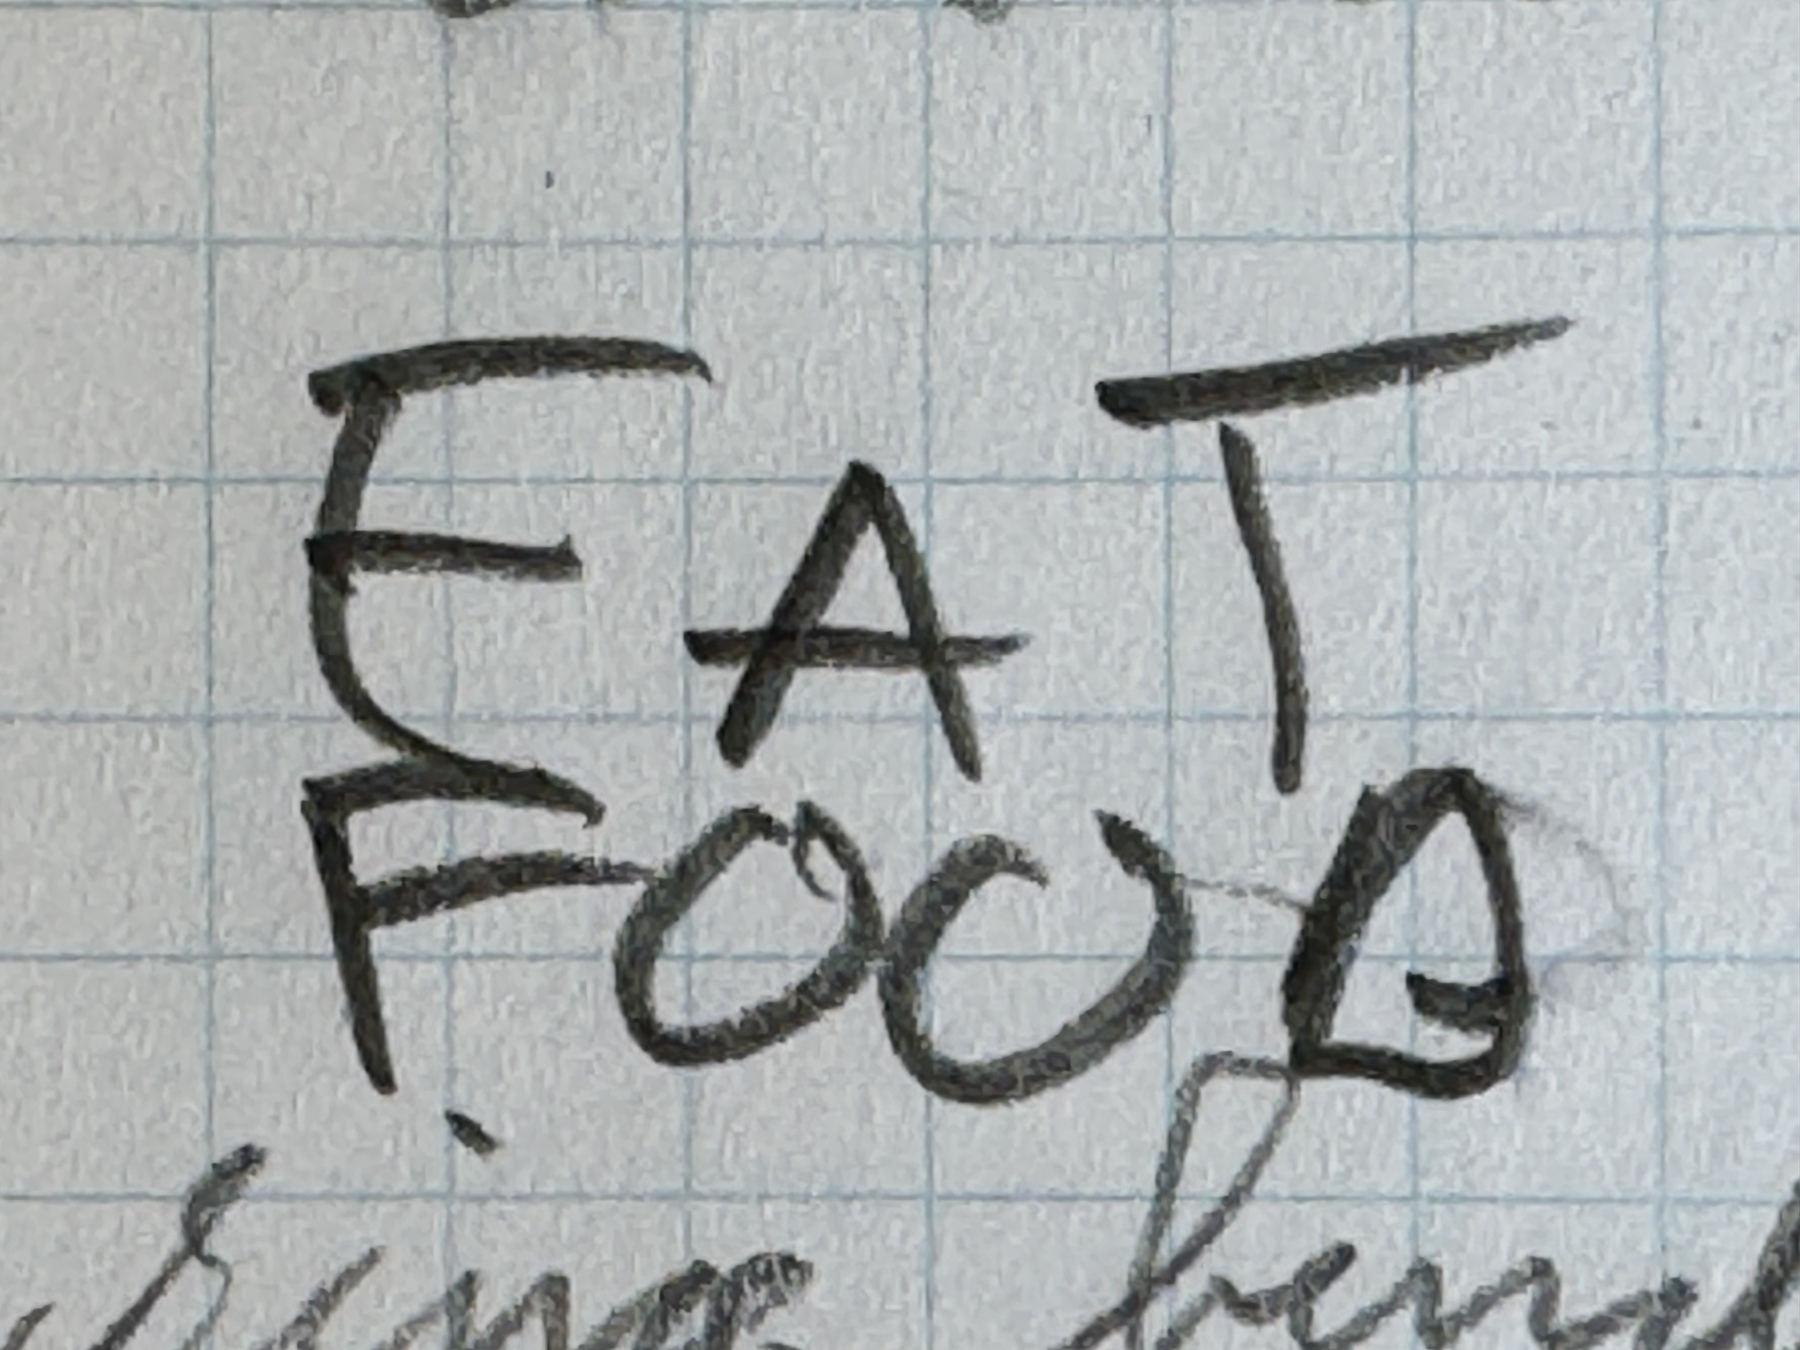 Handwritten note that says “eat food”